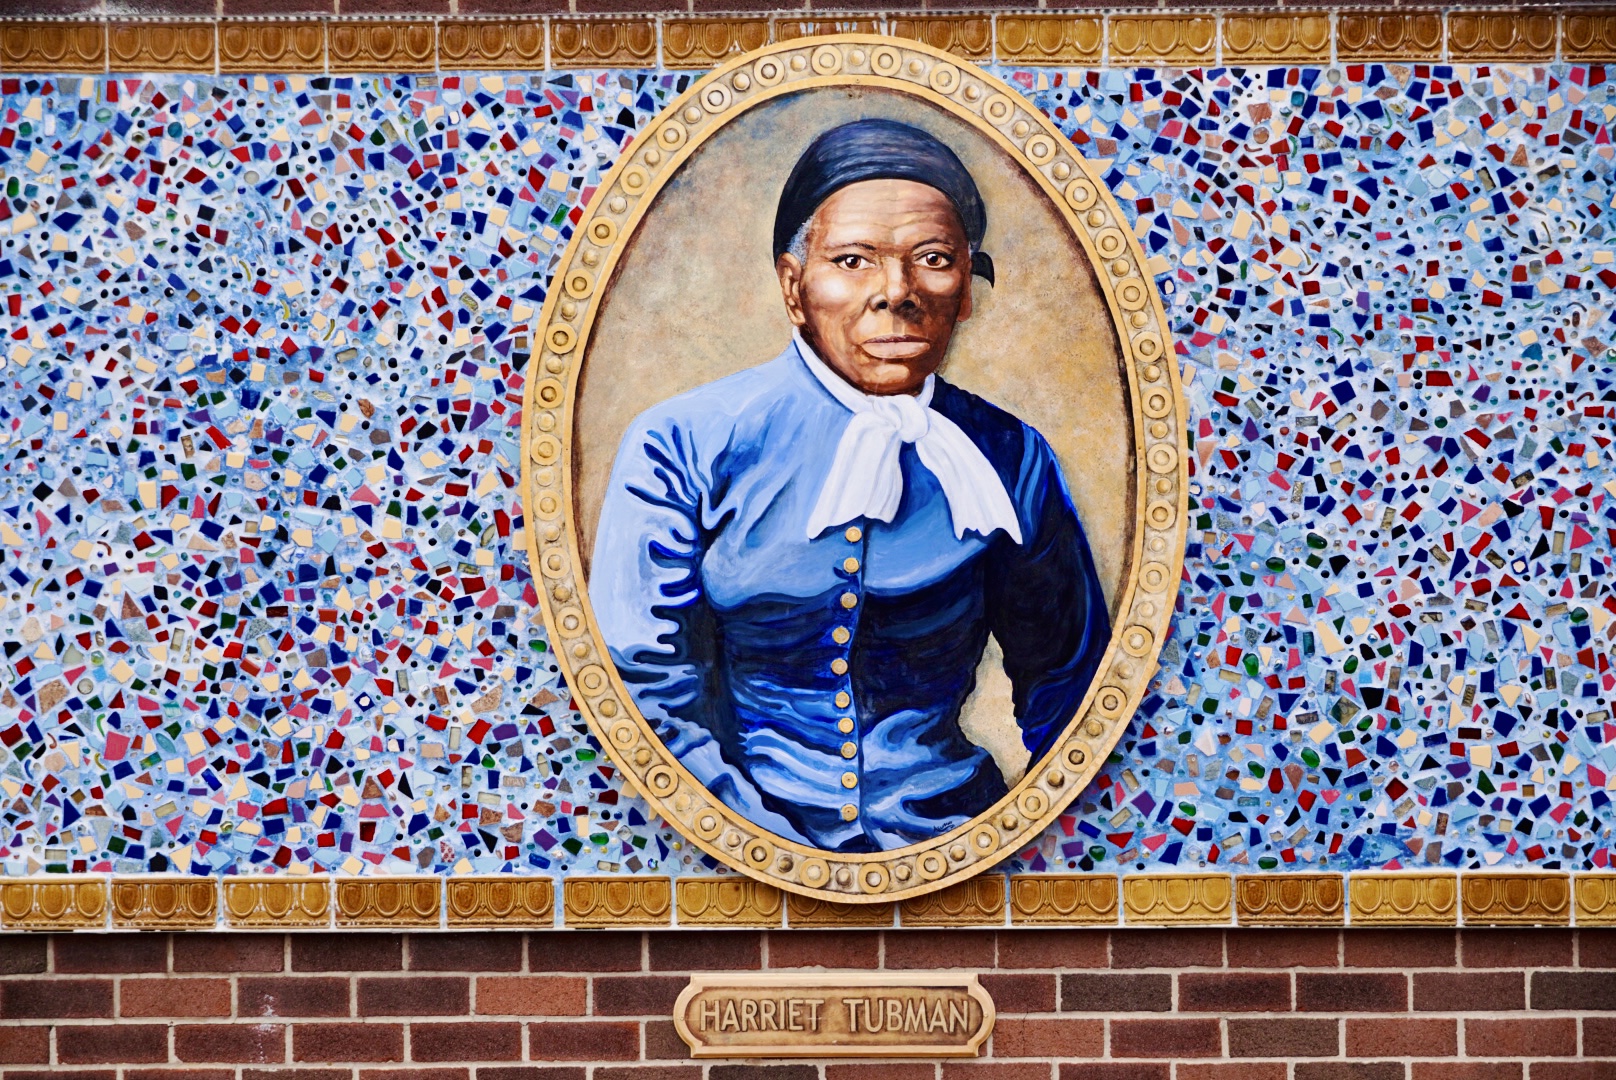 Mosaic in shades of blue  in the center is a  gold oval  with a picture of Harriet Tubman inside